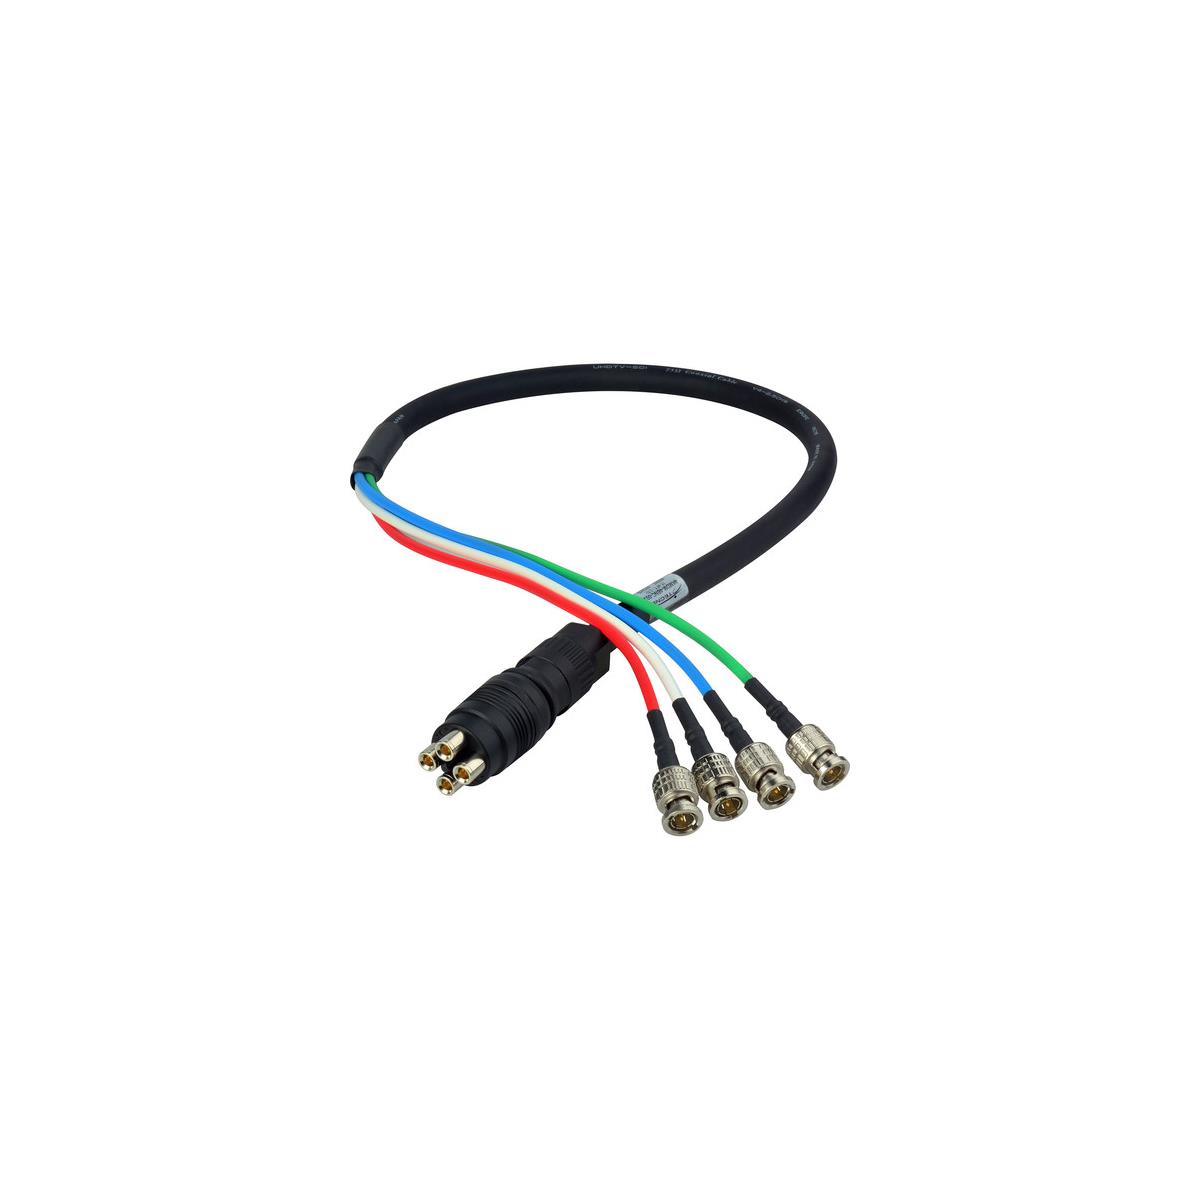 Laird 10' 4K UHD 3G HD-SDI 4-Channel DIN Male to BNC Camera Breakout Cable <b> 4-3G HD-SDI Signal Channel Quick Connect System for 4K/UHD Video Formats </b>One step, quick-connect Laird coax Canare cable assemblies connect 4 channels of 3G HD-SDI signals for 4K/UHD video formats. The Laird cables are assembled with Canare 4 channel, V4-2.5CHW flexible coaxial cable, allowing a break out to 4 Canare BNC or 4 DIN connectors. The Canare male connector, MDM-V4C25HW is designed to mate with the MDF-V4JRU panel mount receptacle which features a 4 DIN pass-through on the back side to increase your connectivity but not your rack space. Laird 4K UHD Canare camera cables assemblies make quick work of keeping everything in line and organized. Available in a variety of lengths. Use with the Canare MDF-V4JRU 4K DIN 1.0/2.3 4-channel chassis mount connector.• Quick connect and disconnect• Multiple 3G-SDI signals to 4K/UHD formats• Canare cable with solid and lightweight nylon resin body• Push-pull locking Canare coax connectors with protective rubber boots• High performance Canare BCP-B25HW BNC or 4 DCP-C25HD DIN connectors• Made in the USA in a Canare trained fiber shop• Canare V4-2.5CHW 4-Channel 4K 75Ohms Coaxial Cable• 4 DIN 1.0/2.3 connectors• MDF-V4JRU accepts MDM-V4C25HW and also DIN 1.0/2.3 plugs<b> Applications </b>• High density 3G-SDI• applications• Mobile trucks• Fly packs• Studios• 4K transmission• Consolidate HD-SDI lines